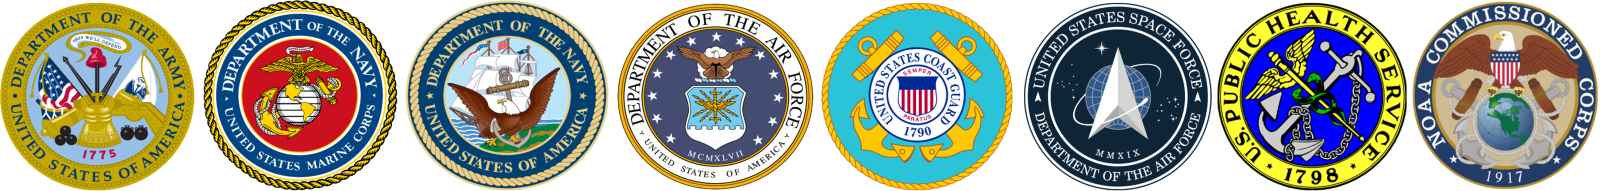 Military Department Seals - Army, Marine Corps, Navy, Air Force, Coast Guard, Space Force, U.S. Public Health Service, NOAA